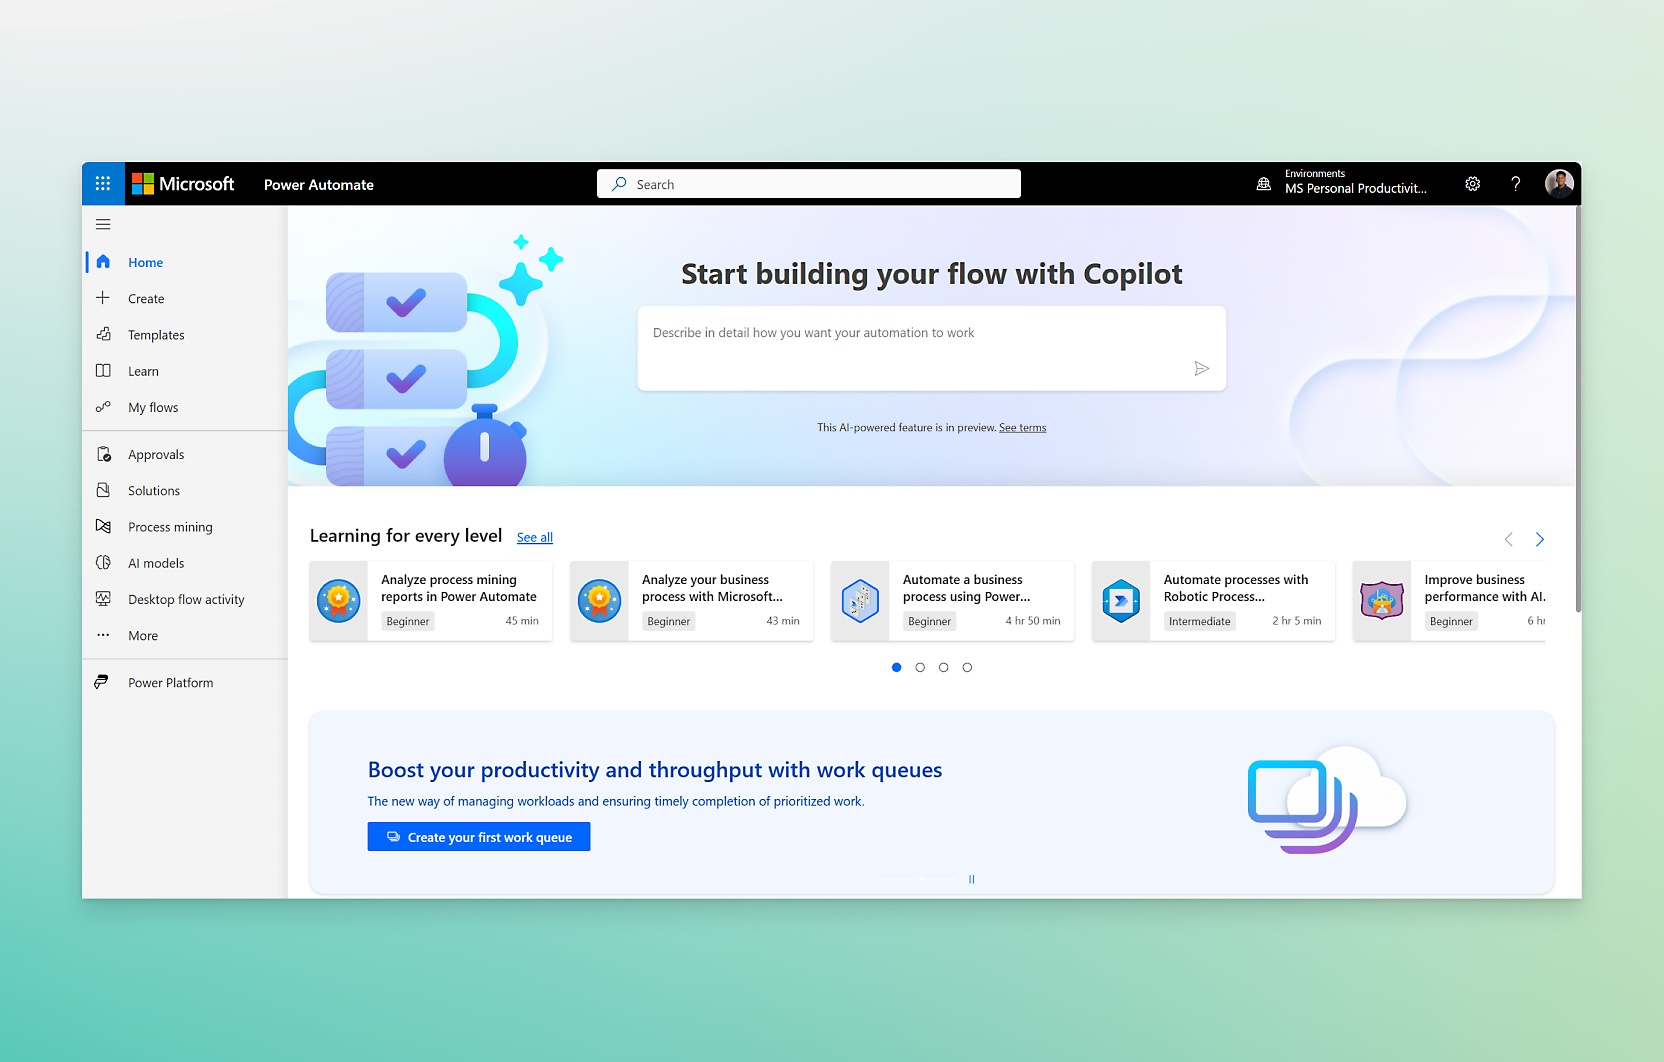 Microsoft Power Automate landing page showing a prompt to start building your flow with copilot